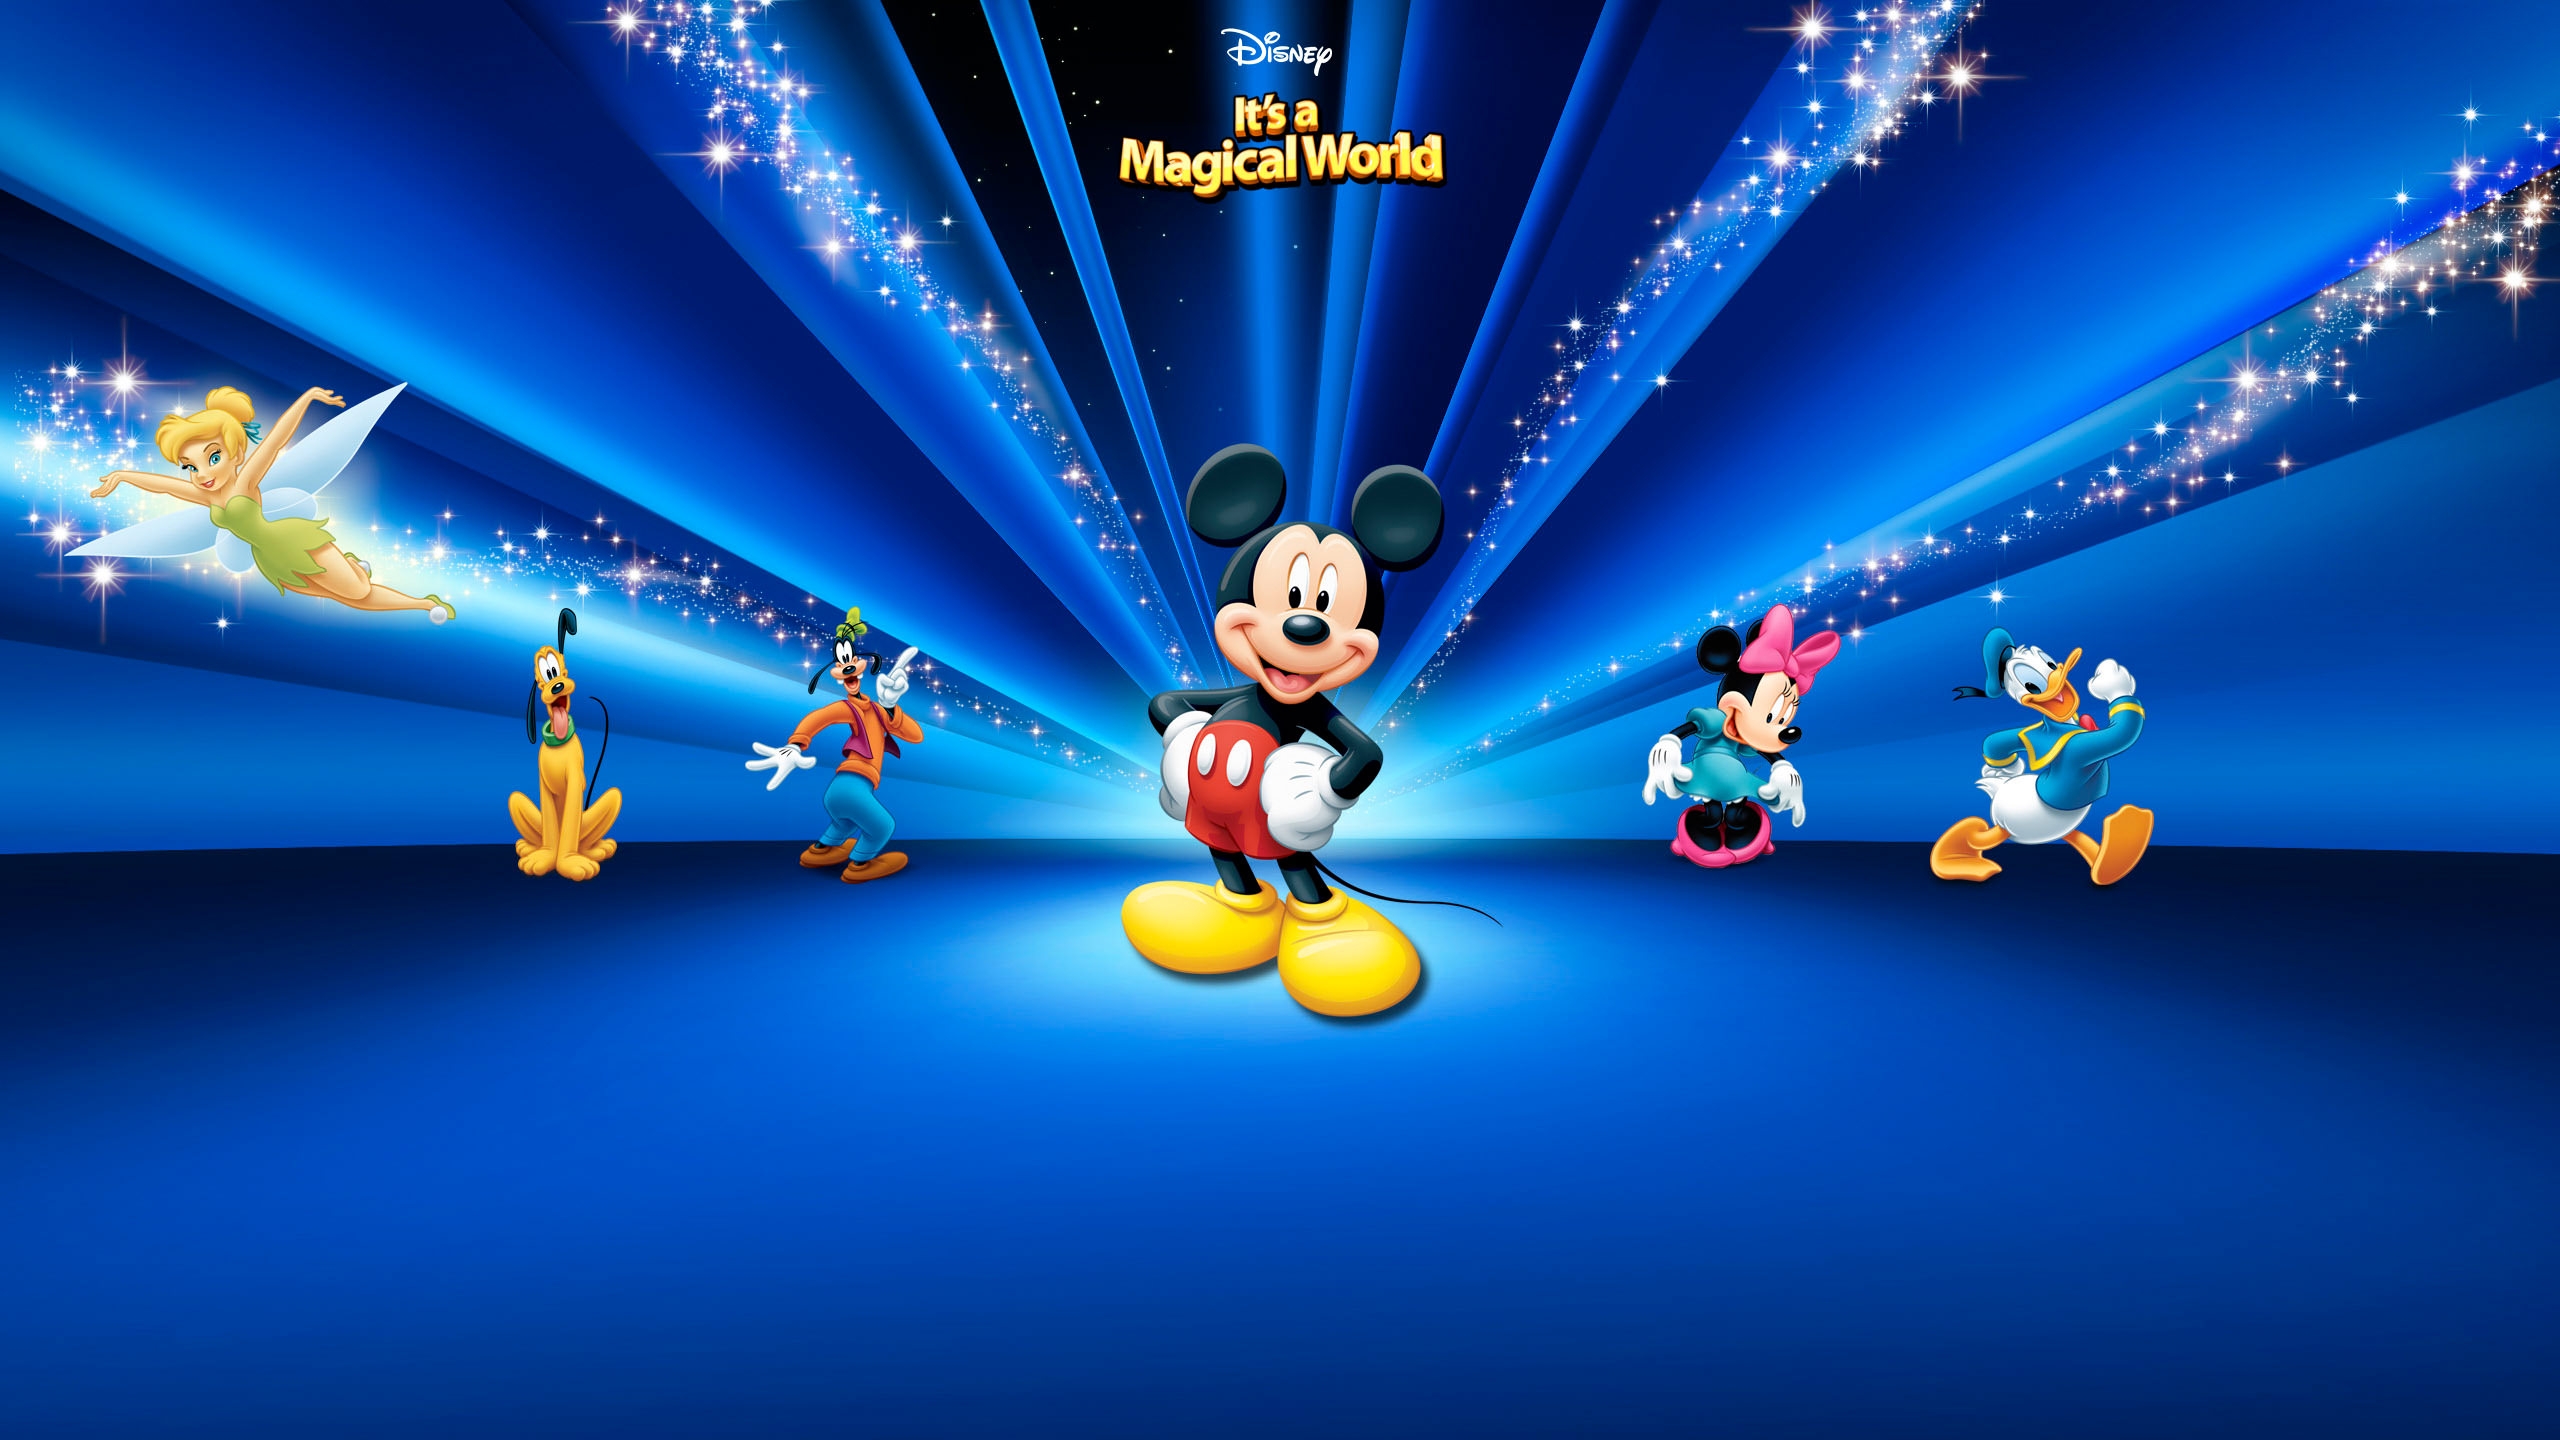 FREE Mickey Mouse Wallpaper in PSD